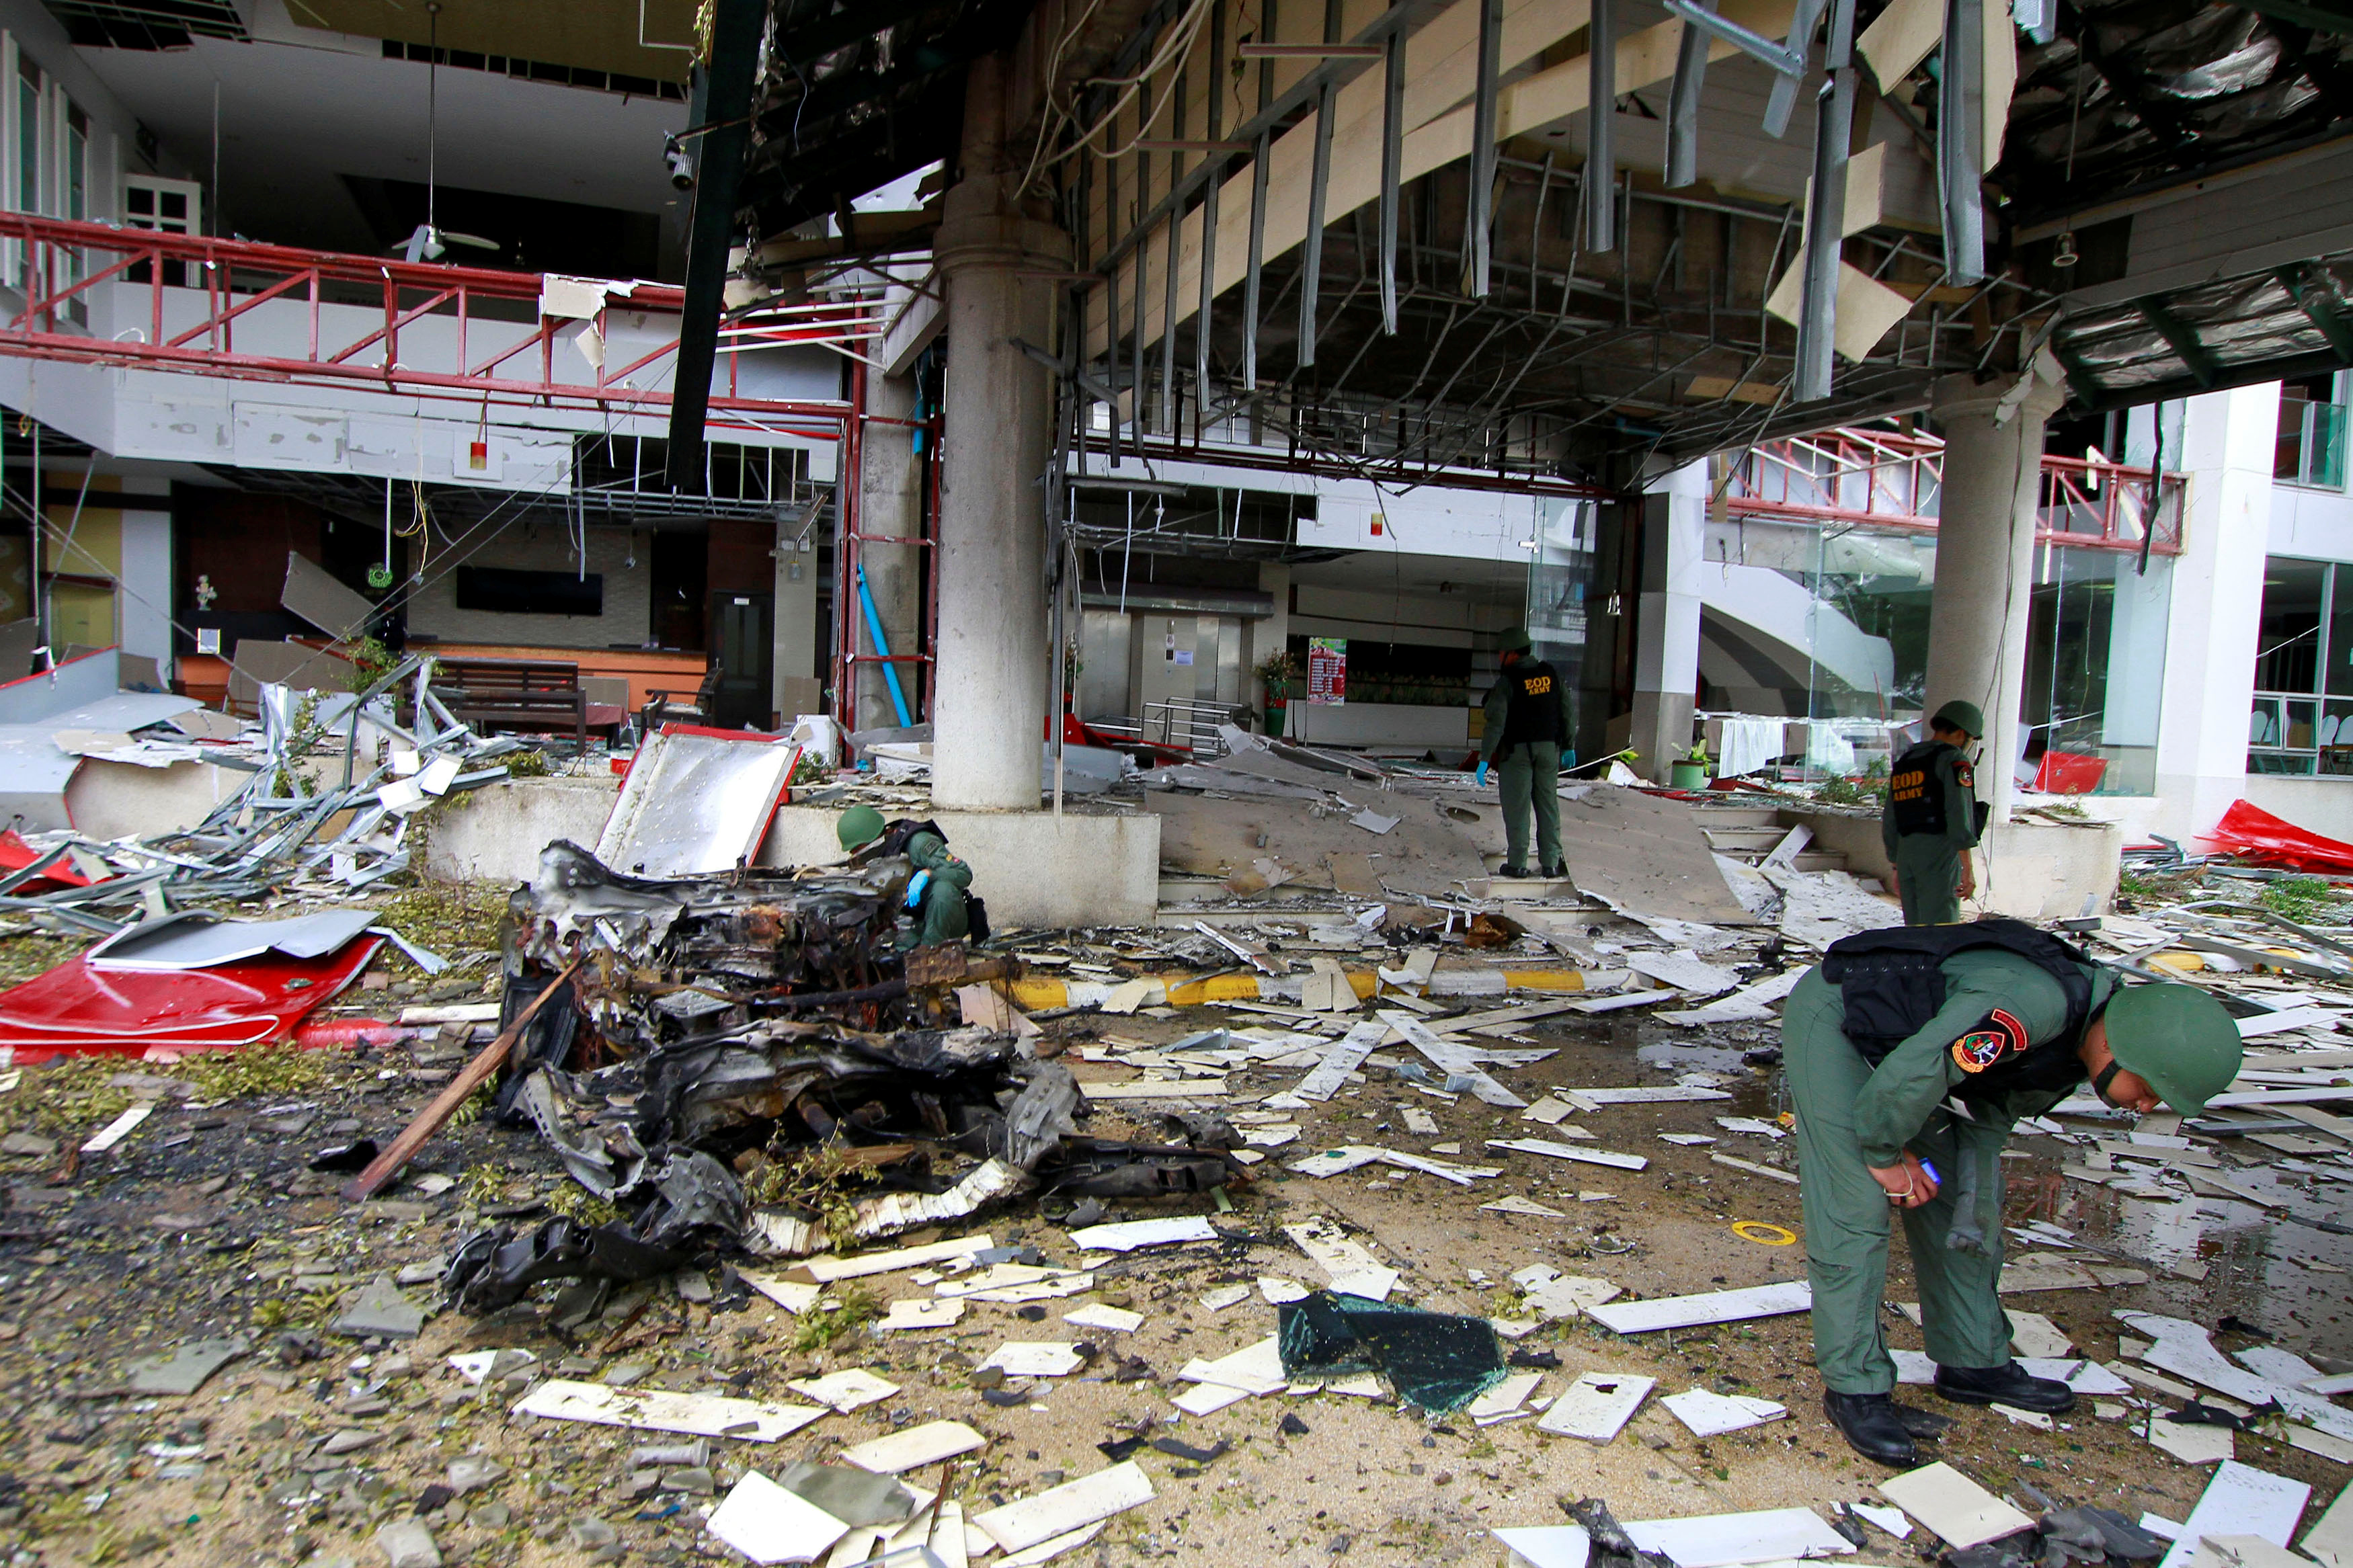 Thai soldiers inspect the scene of a car bomb blast outside a hotel in the southern province of Pattani, Thailand on August 24, 2016. (Surapan Boonthamon — REUTERS)